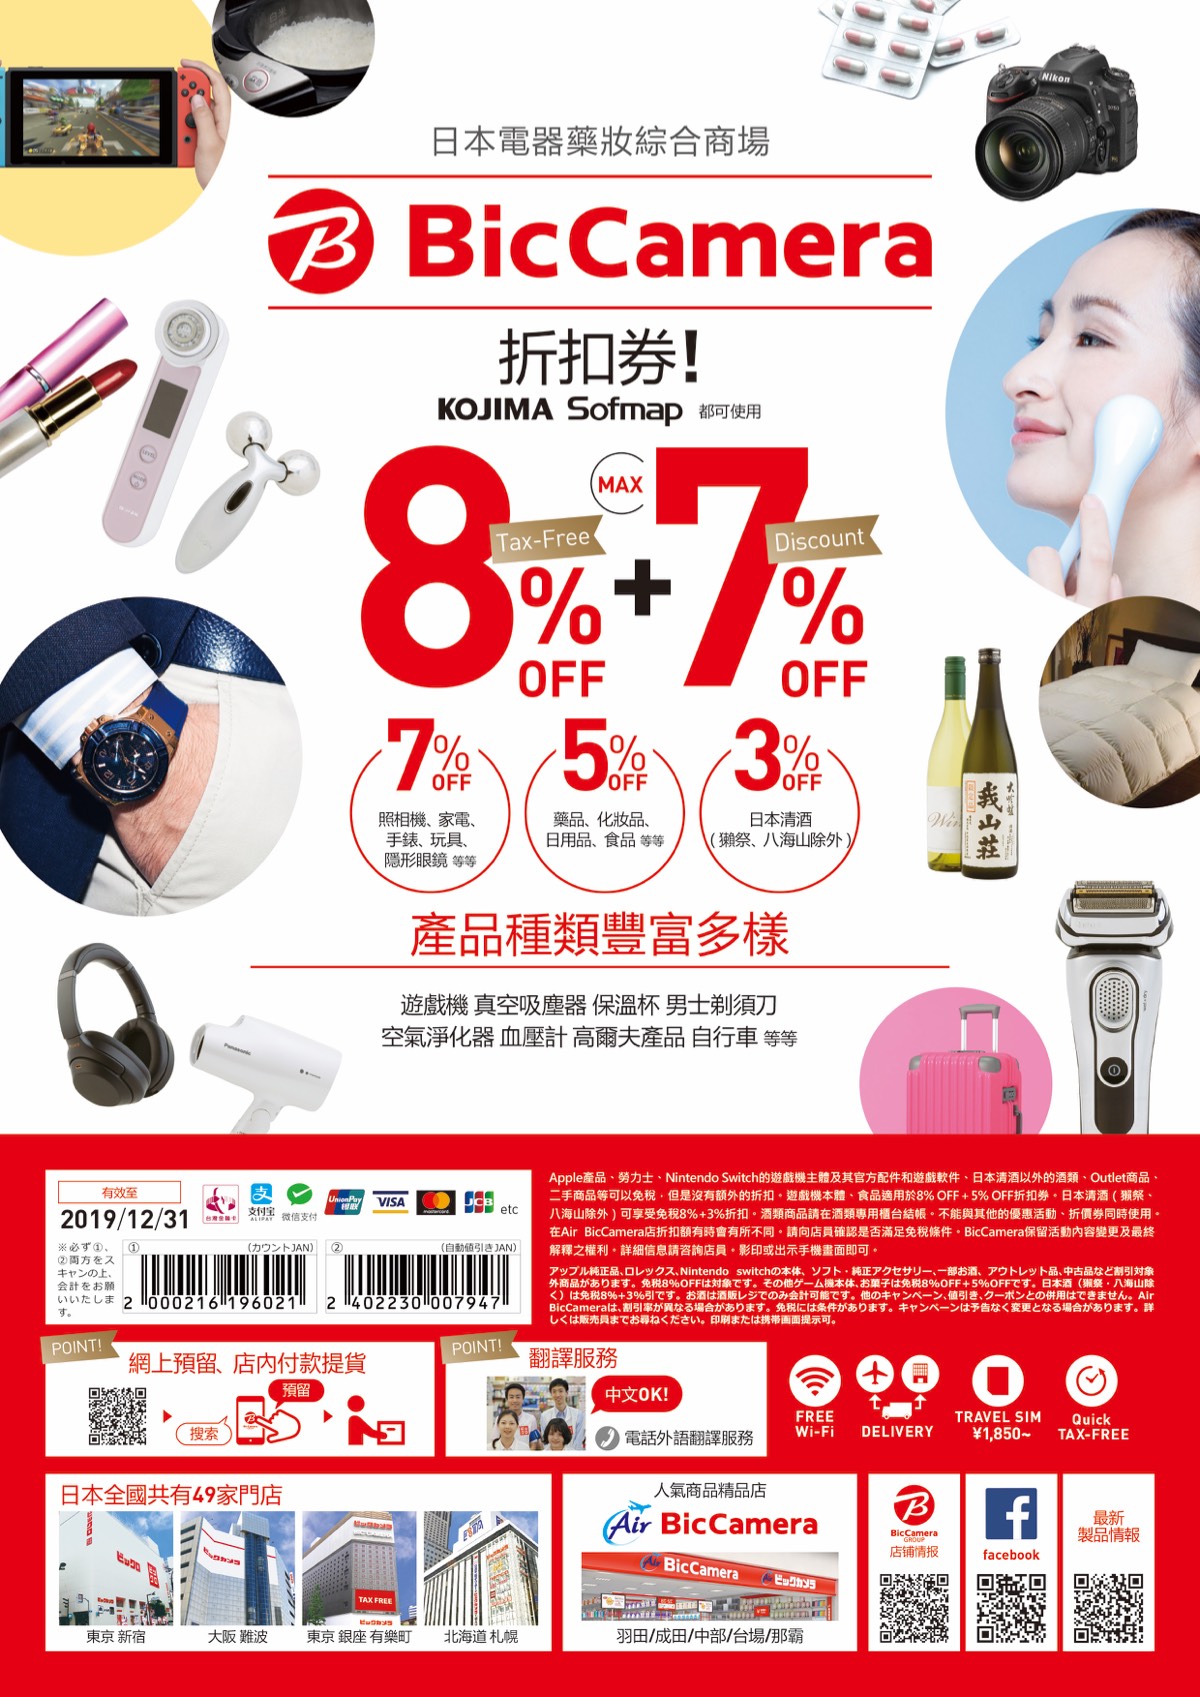 【Bic Camera Coupon 2023】Up To 17% OFF, The Best Bic Camera Coupon You Can Find